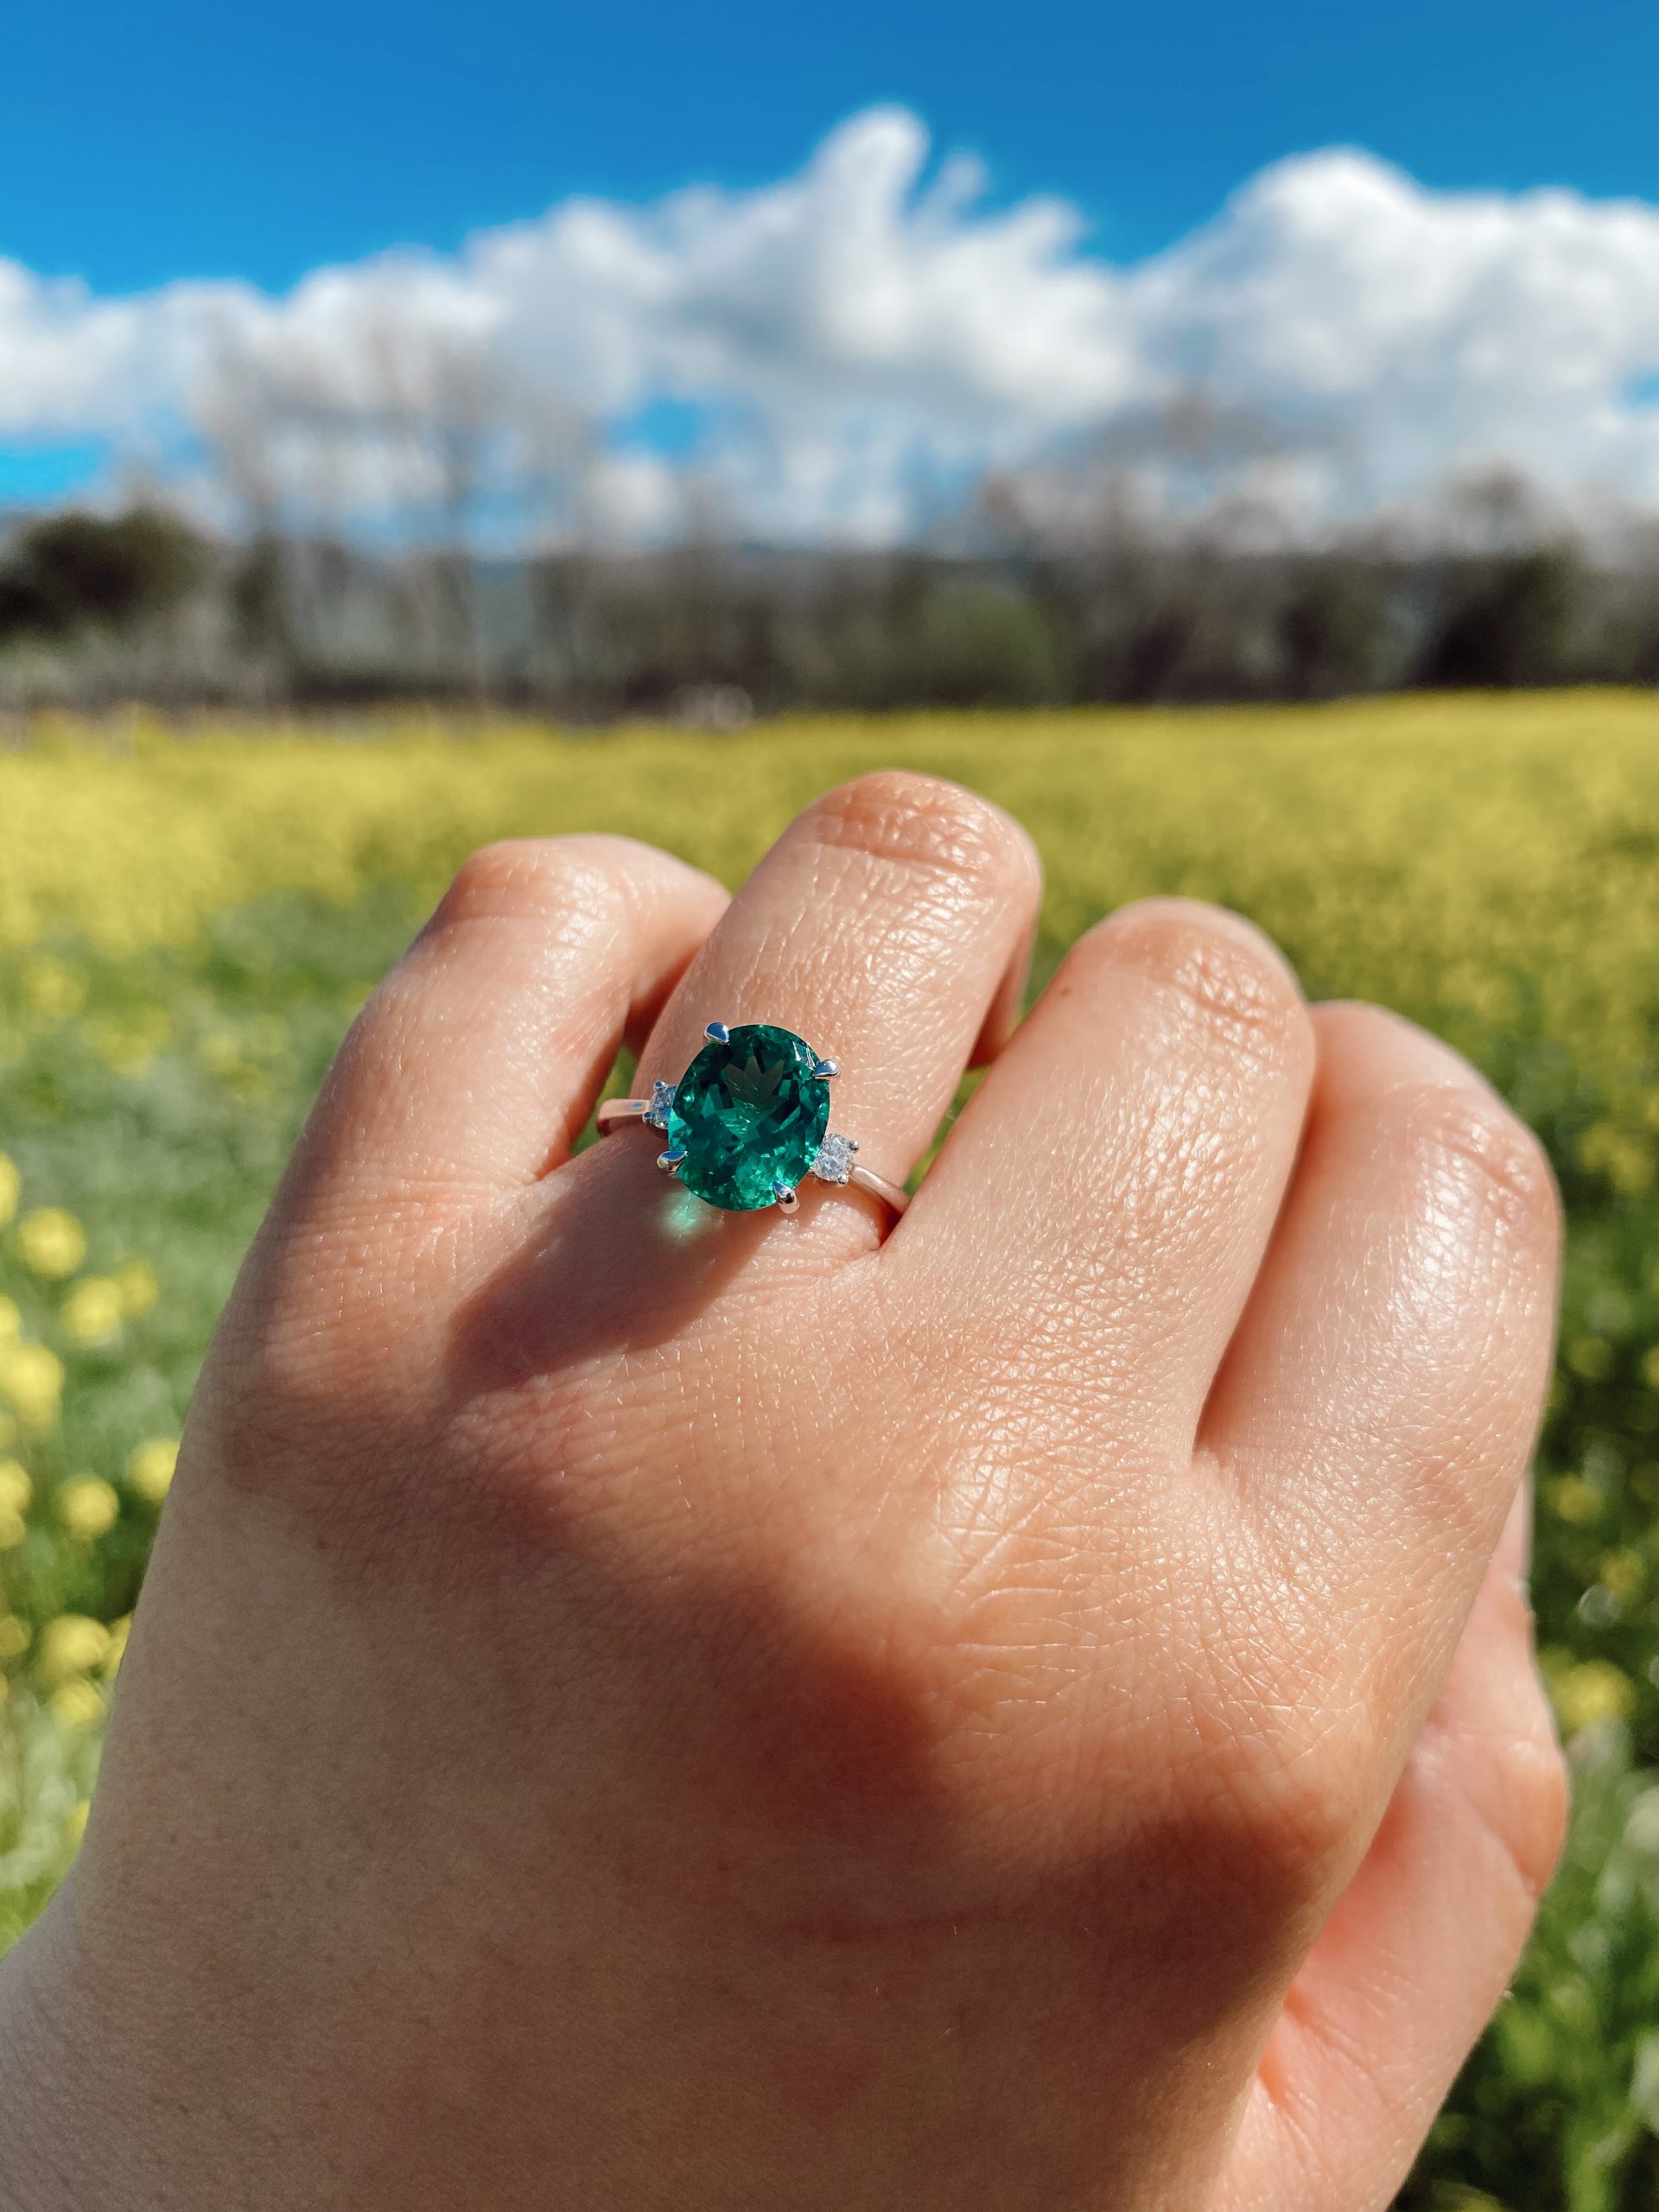 12 Green Gemstone Rings That Are Stunning – And Totally Unexpected